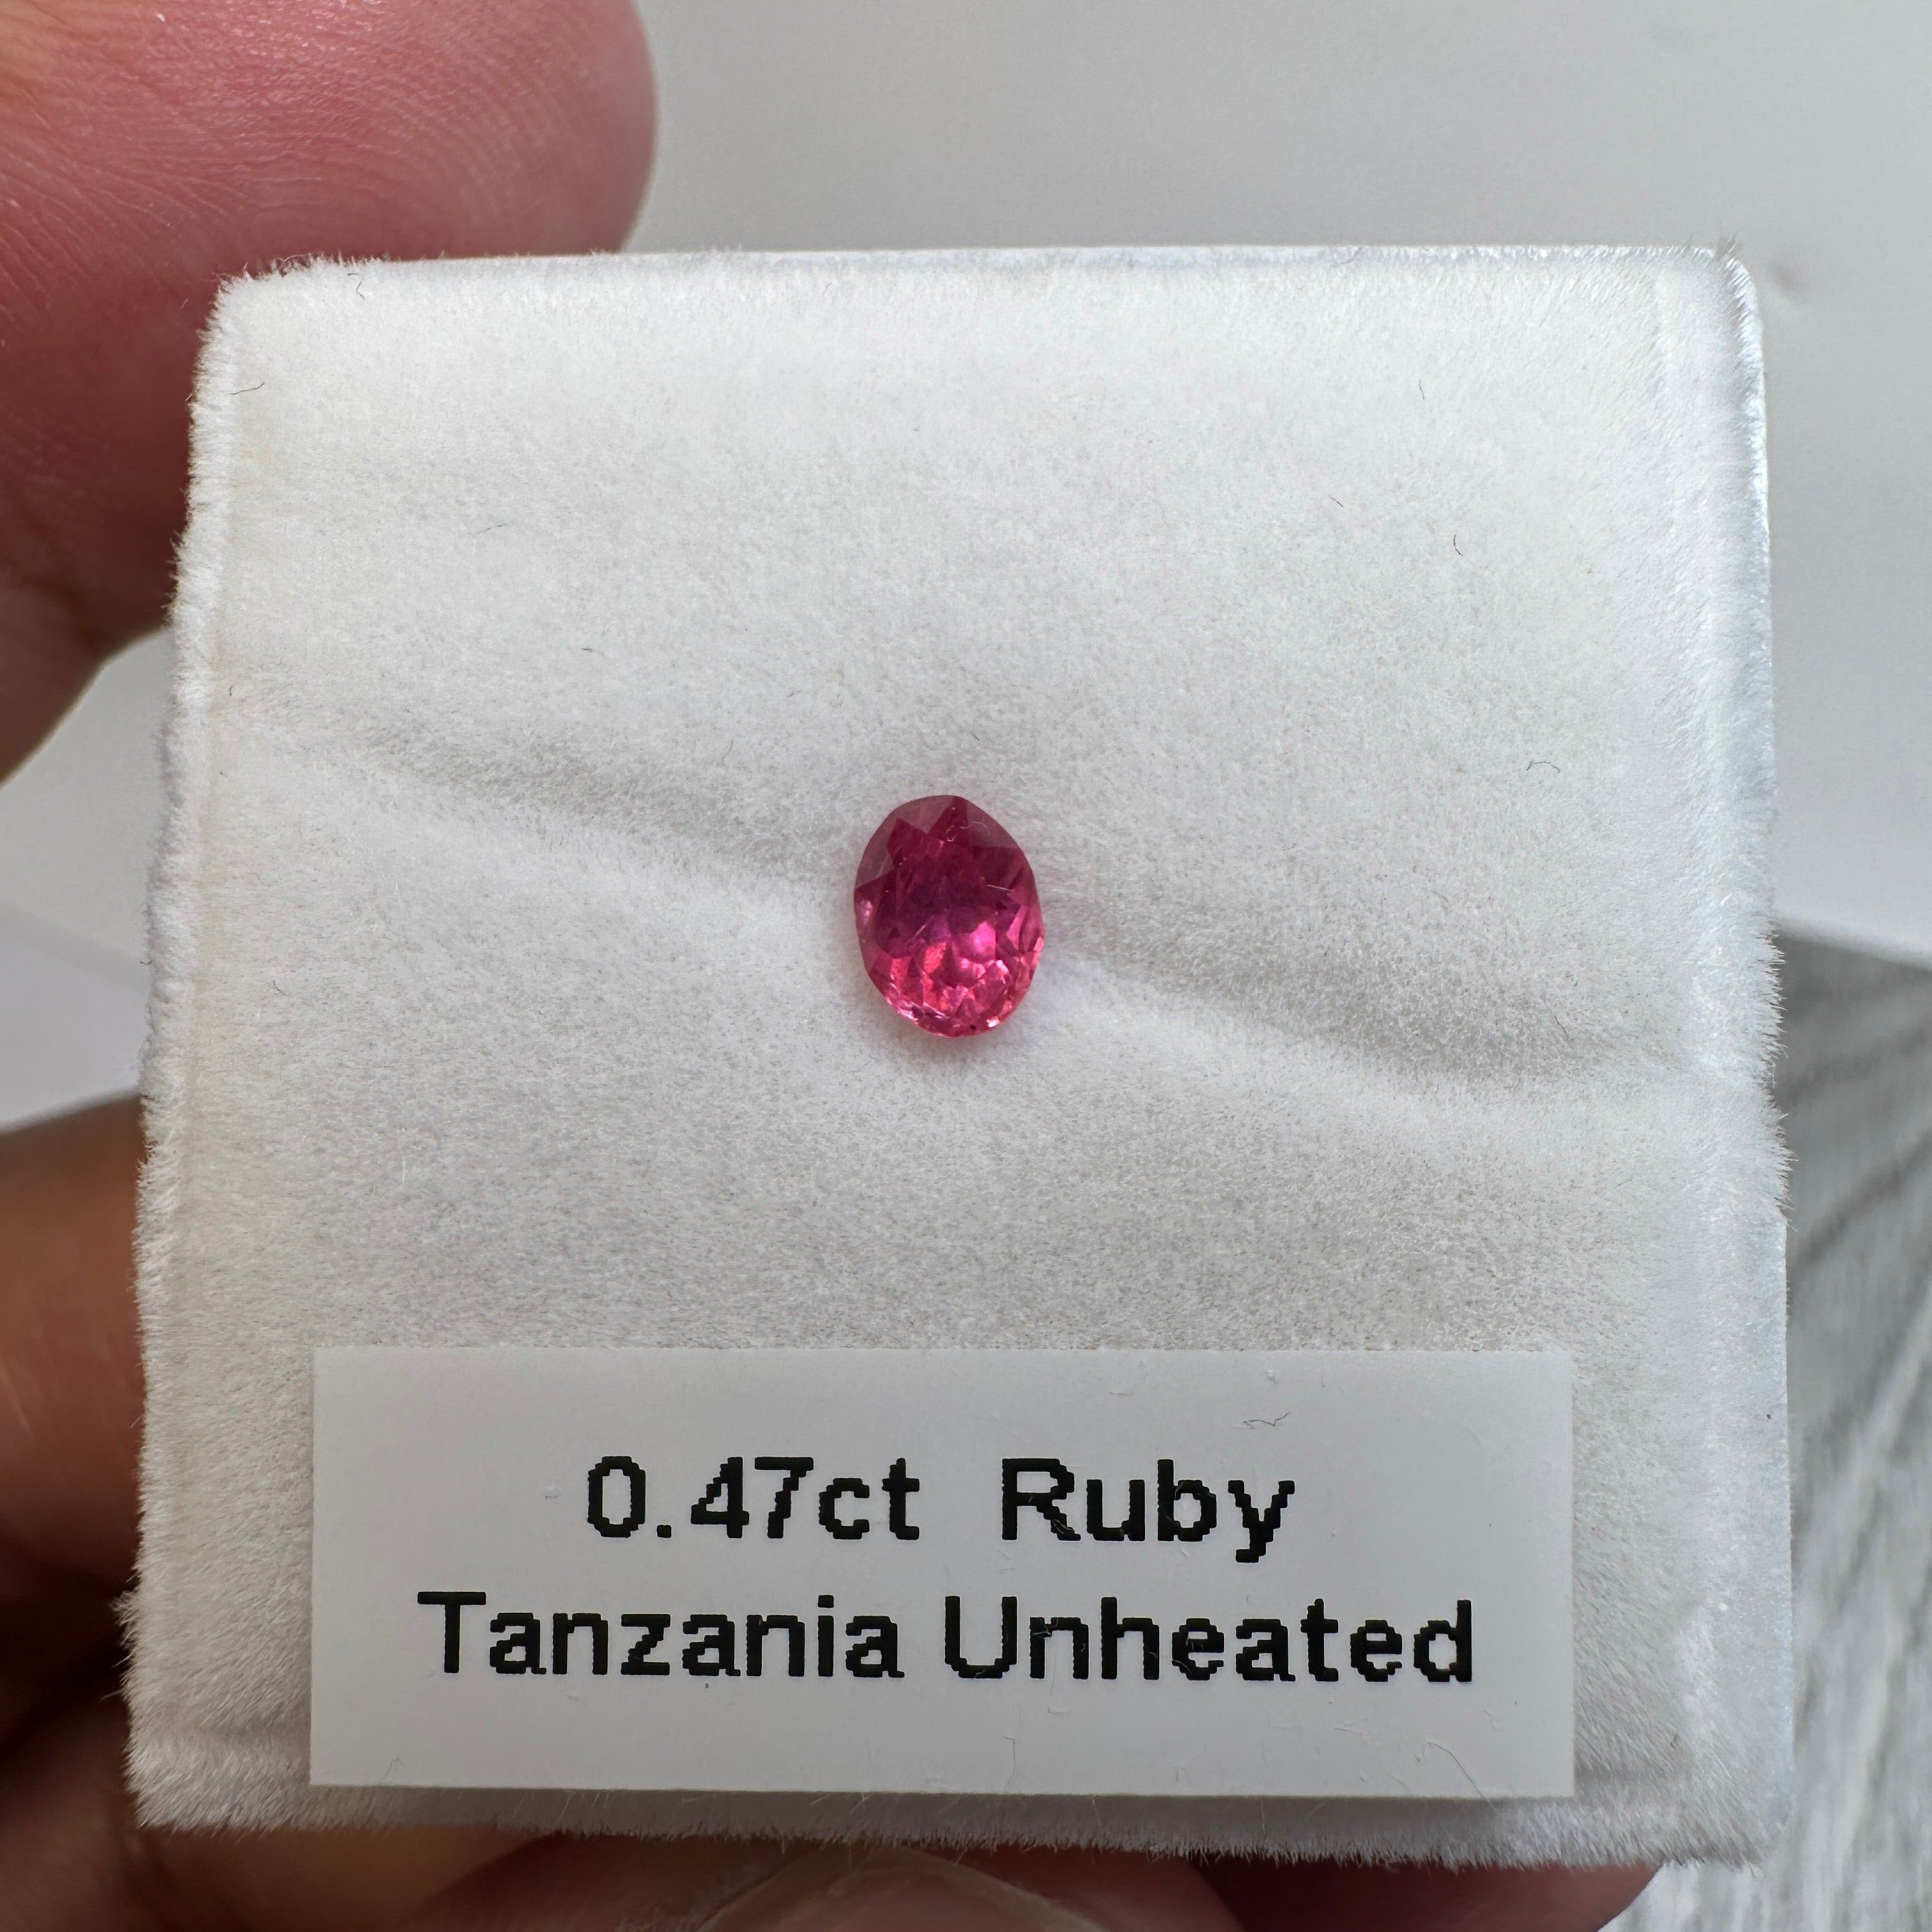 0.47ct Ruby. Winza Untreated, Untreated Unheated